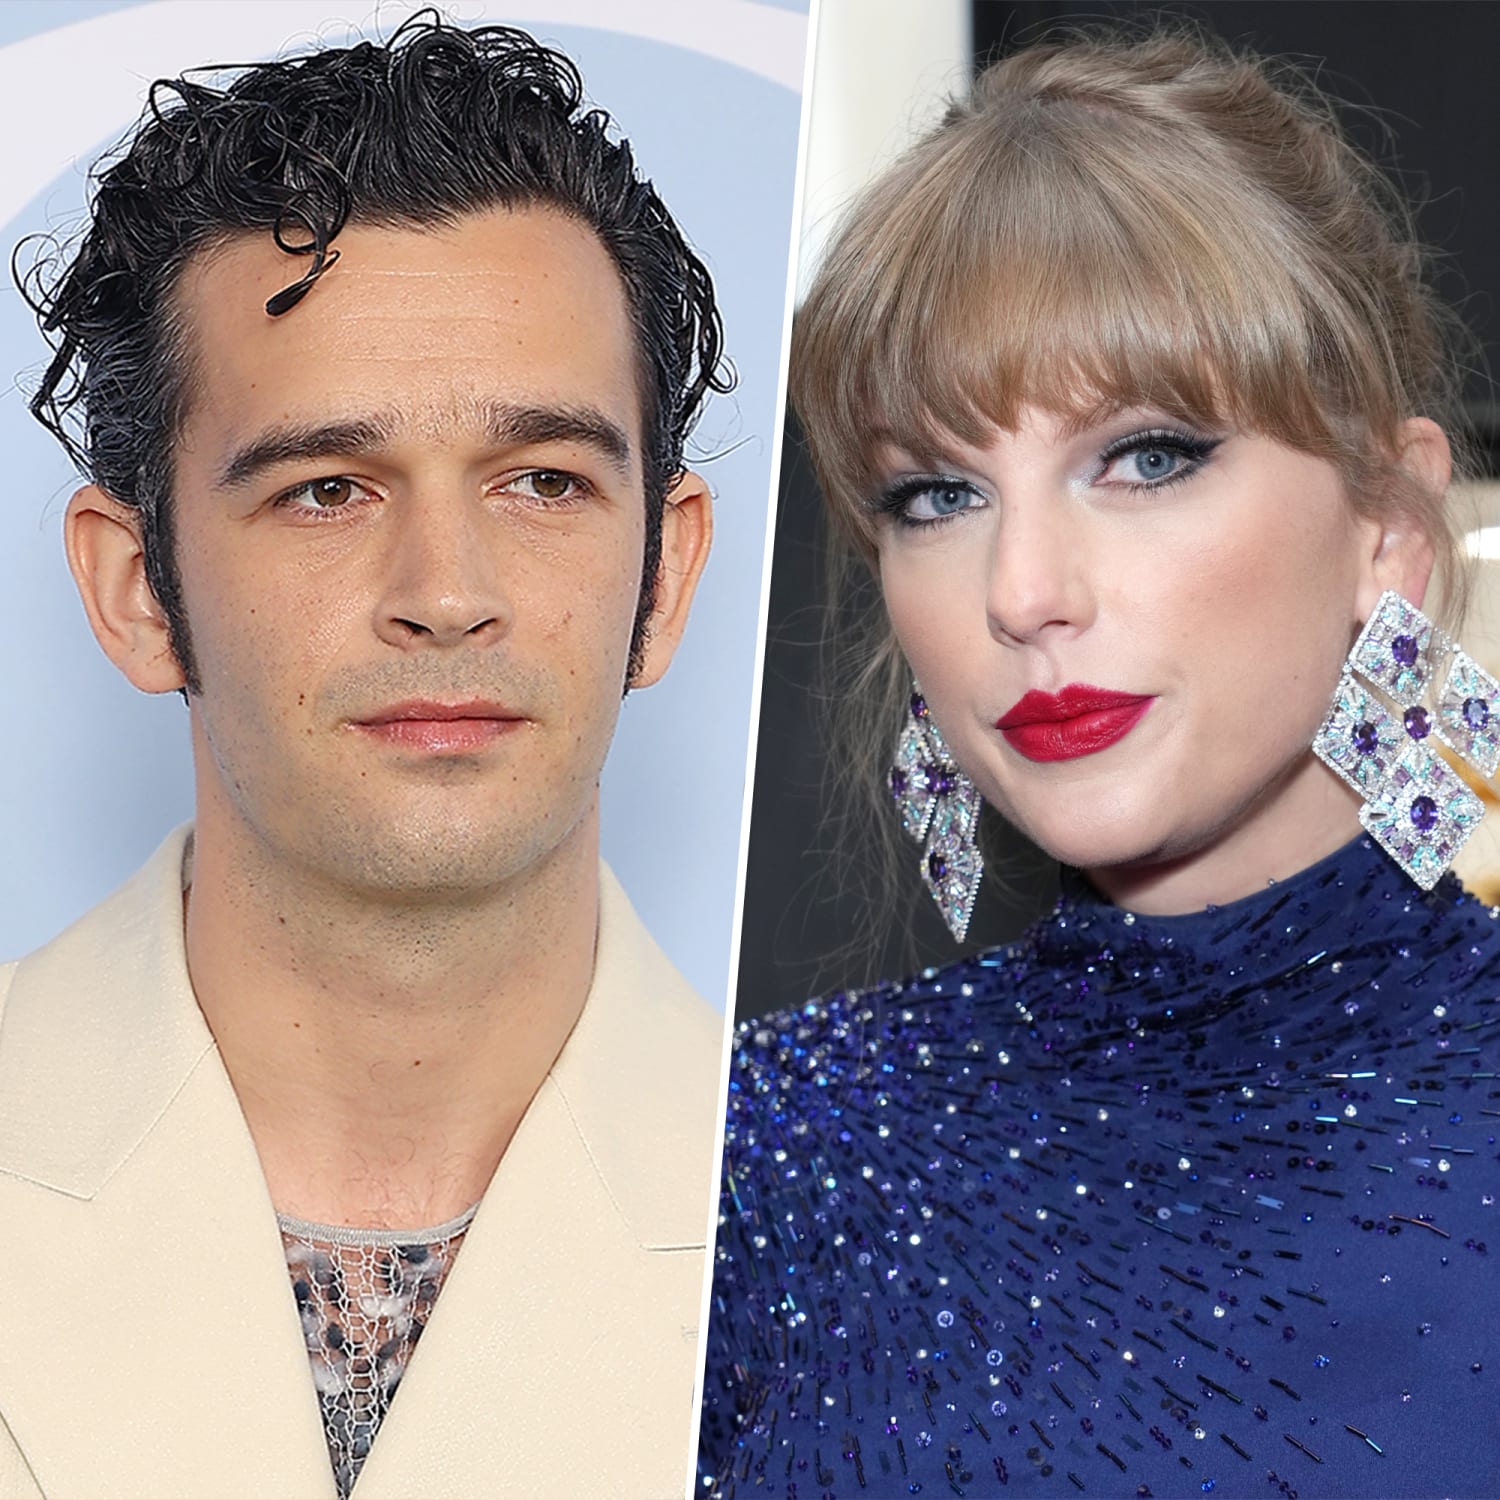 Taylor Swift is dating like a dude